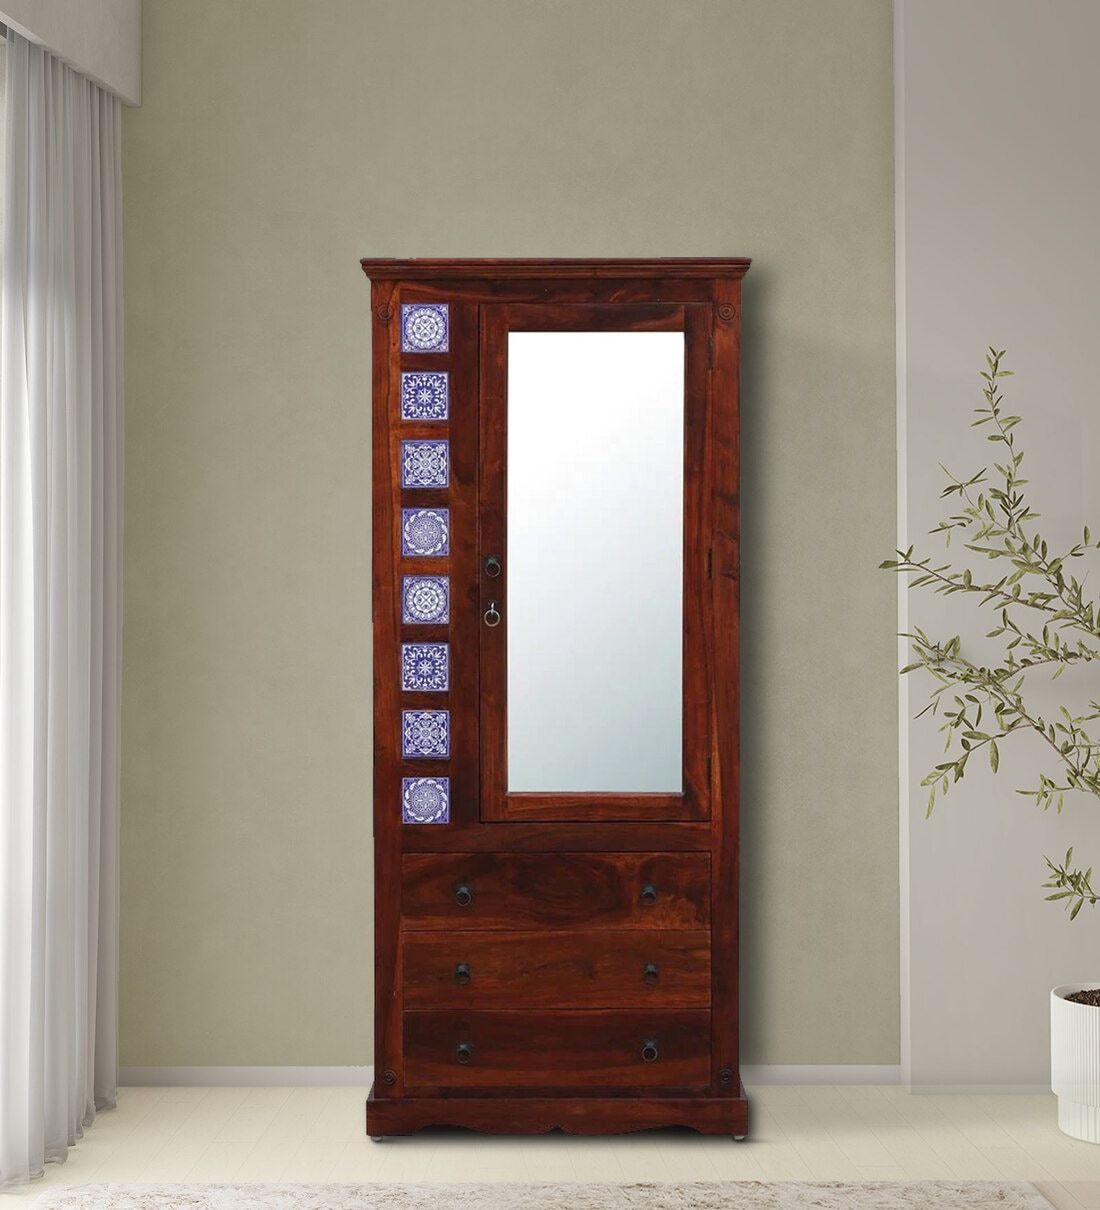 Buy Kamchini Sheesham Wood Single Door Wardrobe In Scratch Resistant Honey  Oak Finish With Mirror At 1% Offmudramark From Pepperfry | Pepperfry With Single Door Mirrored Wardrobes (View 8 of 15)